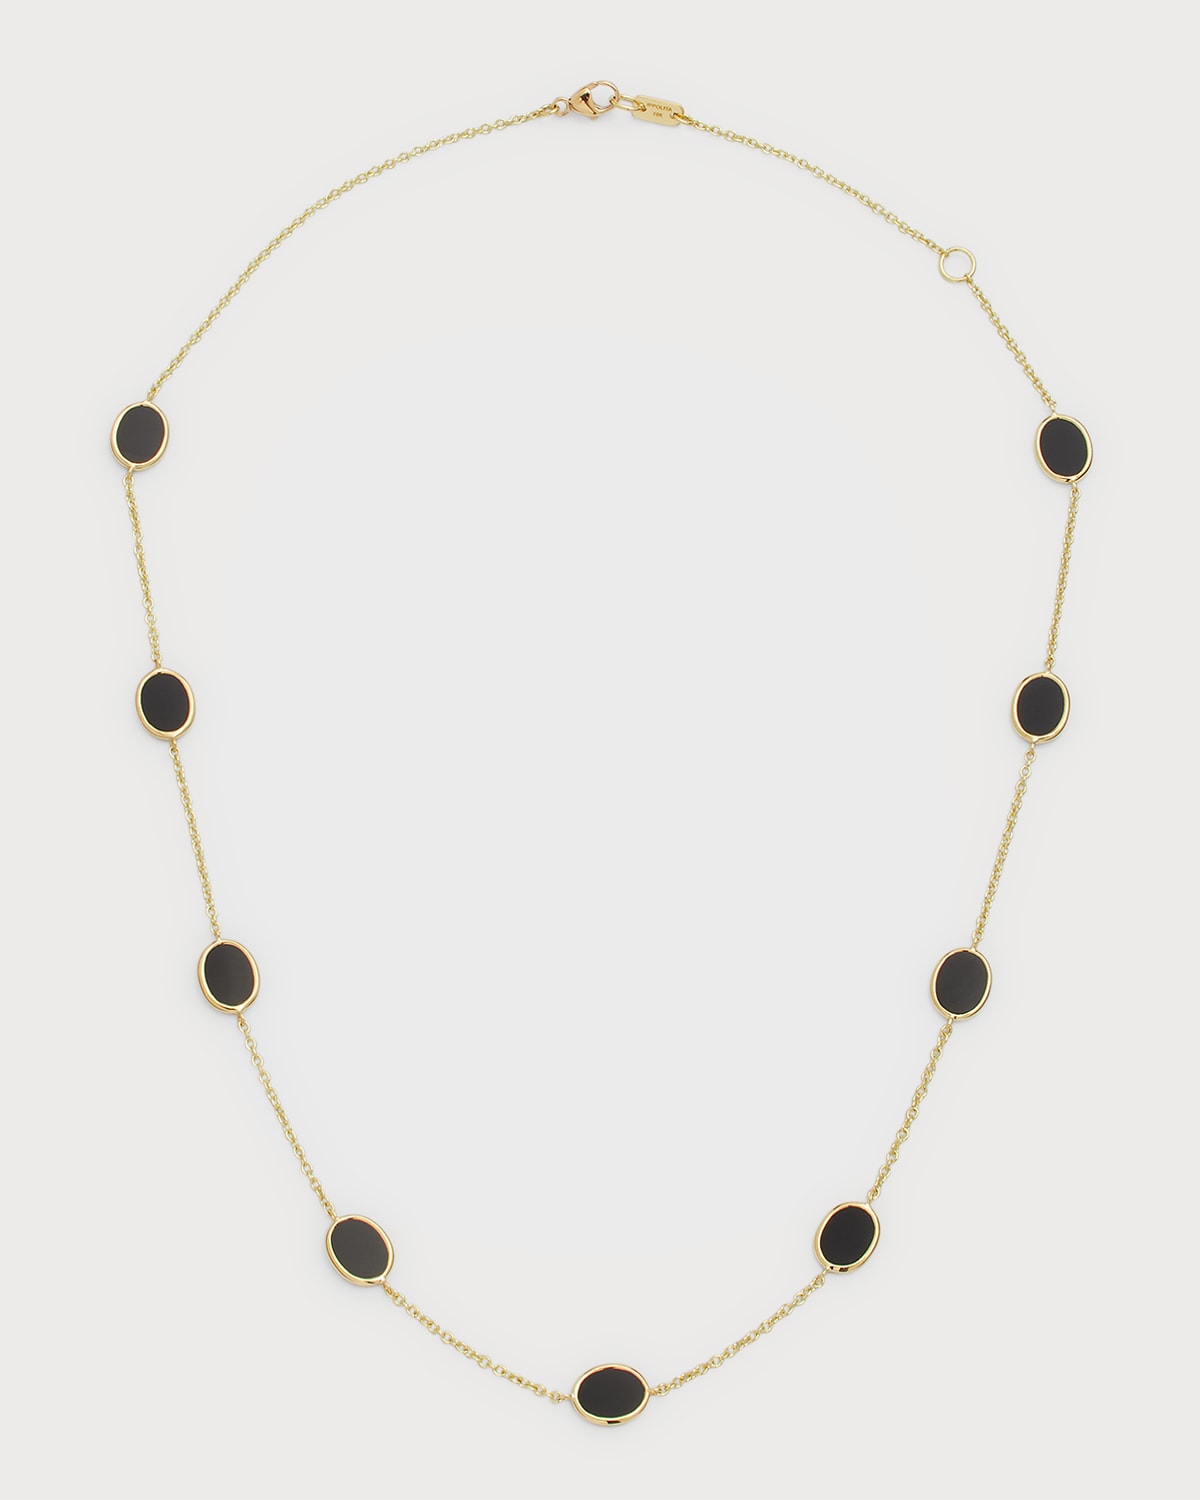 Ippolita 18k Polished Rock Candy Confetti Necklace in Onyx